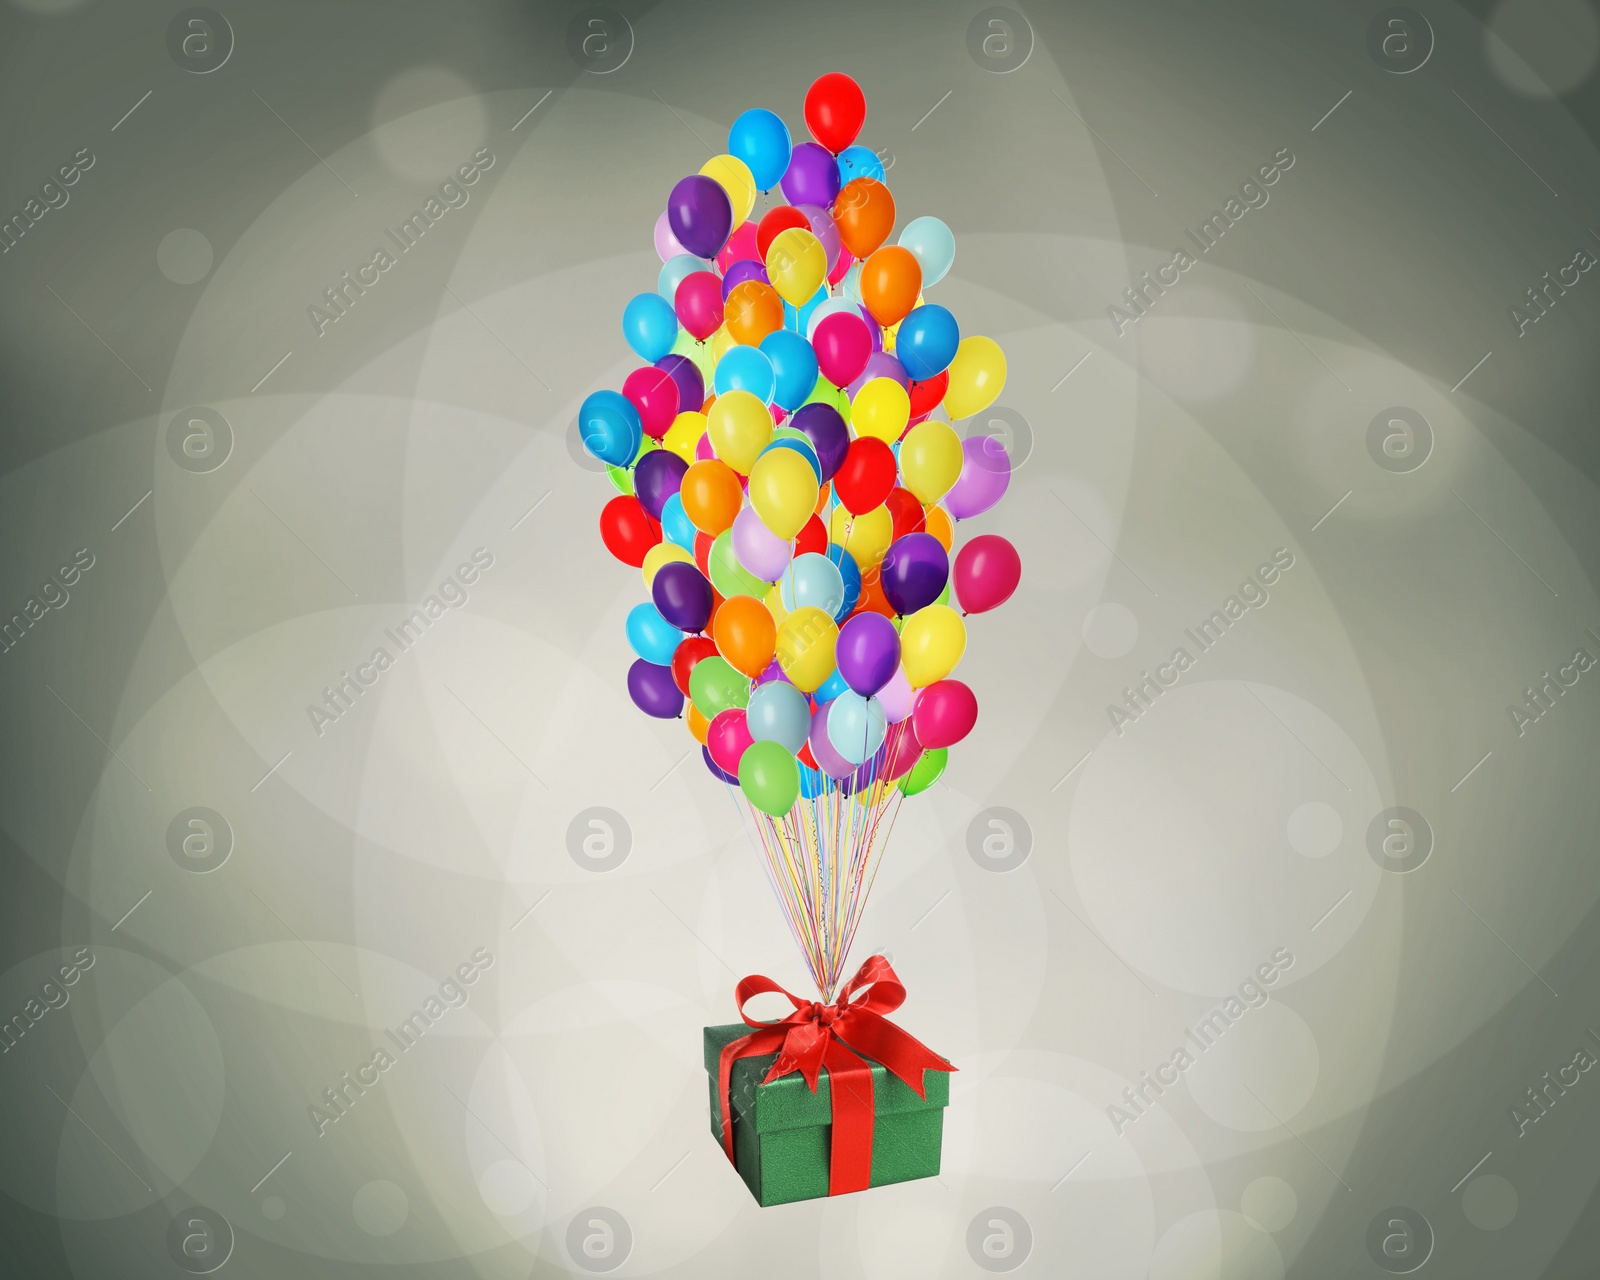 Image of Many balloons tied to gift box on color background